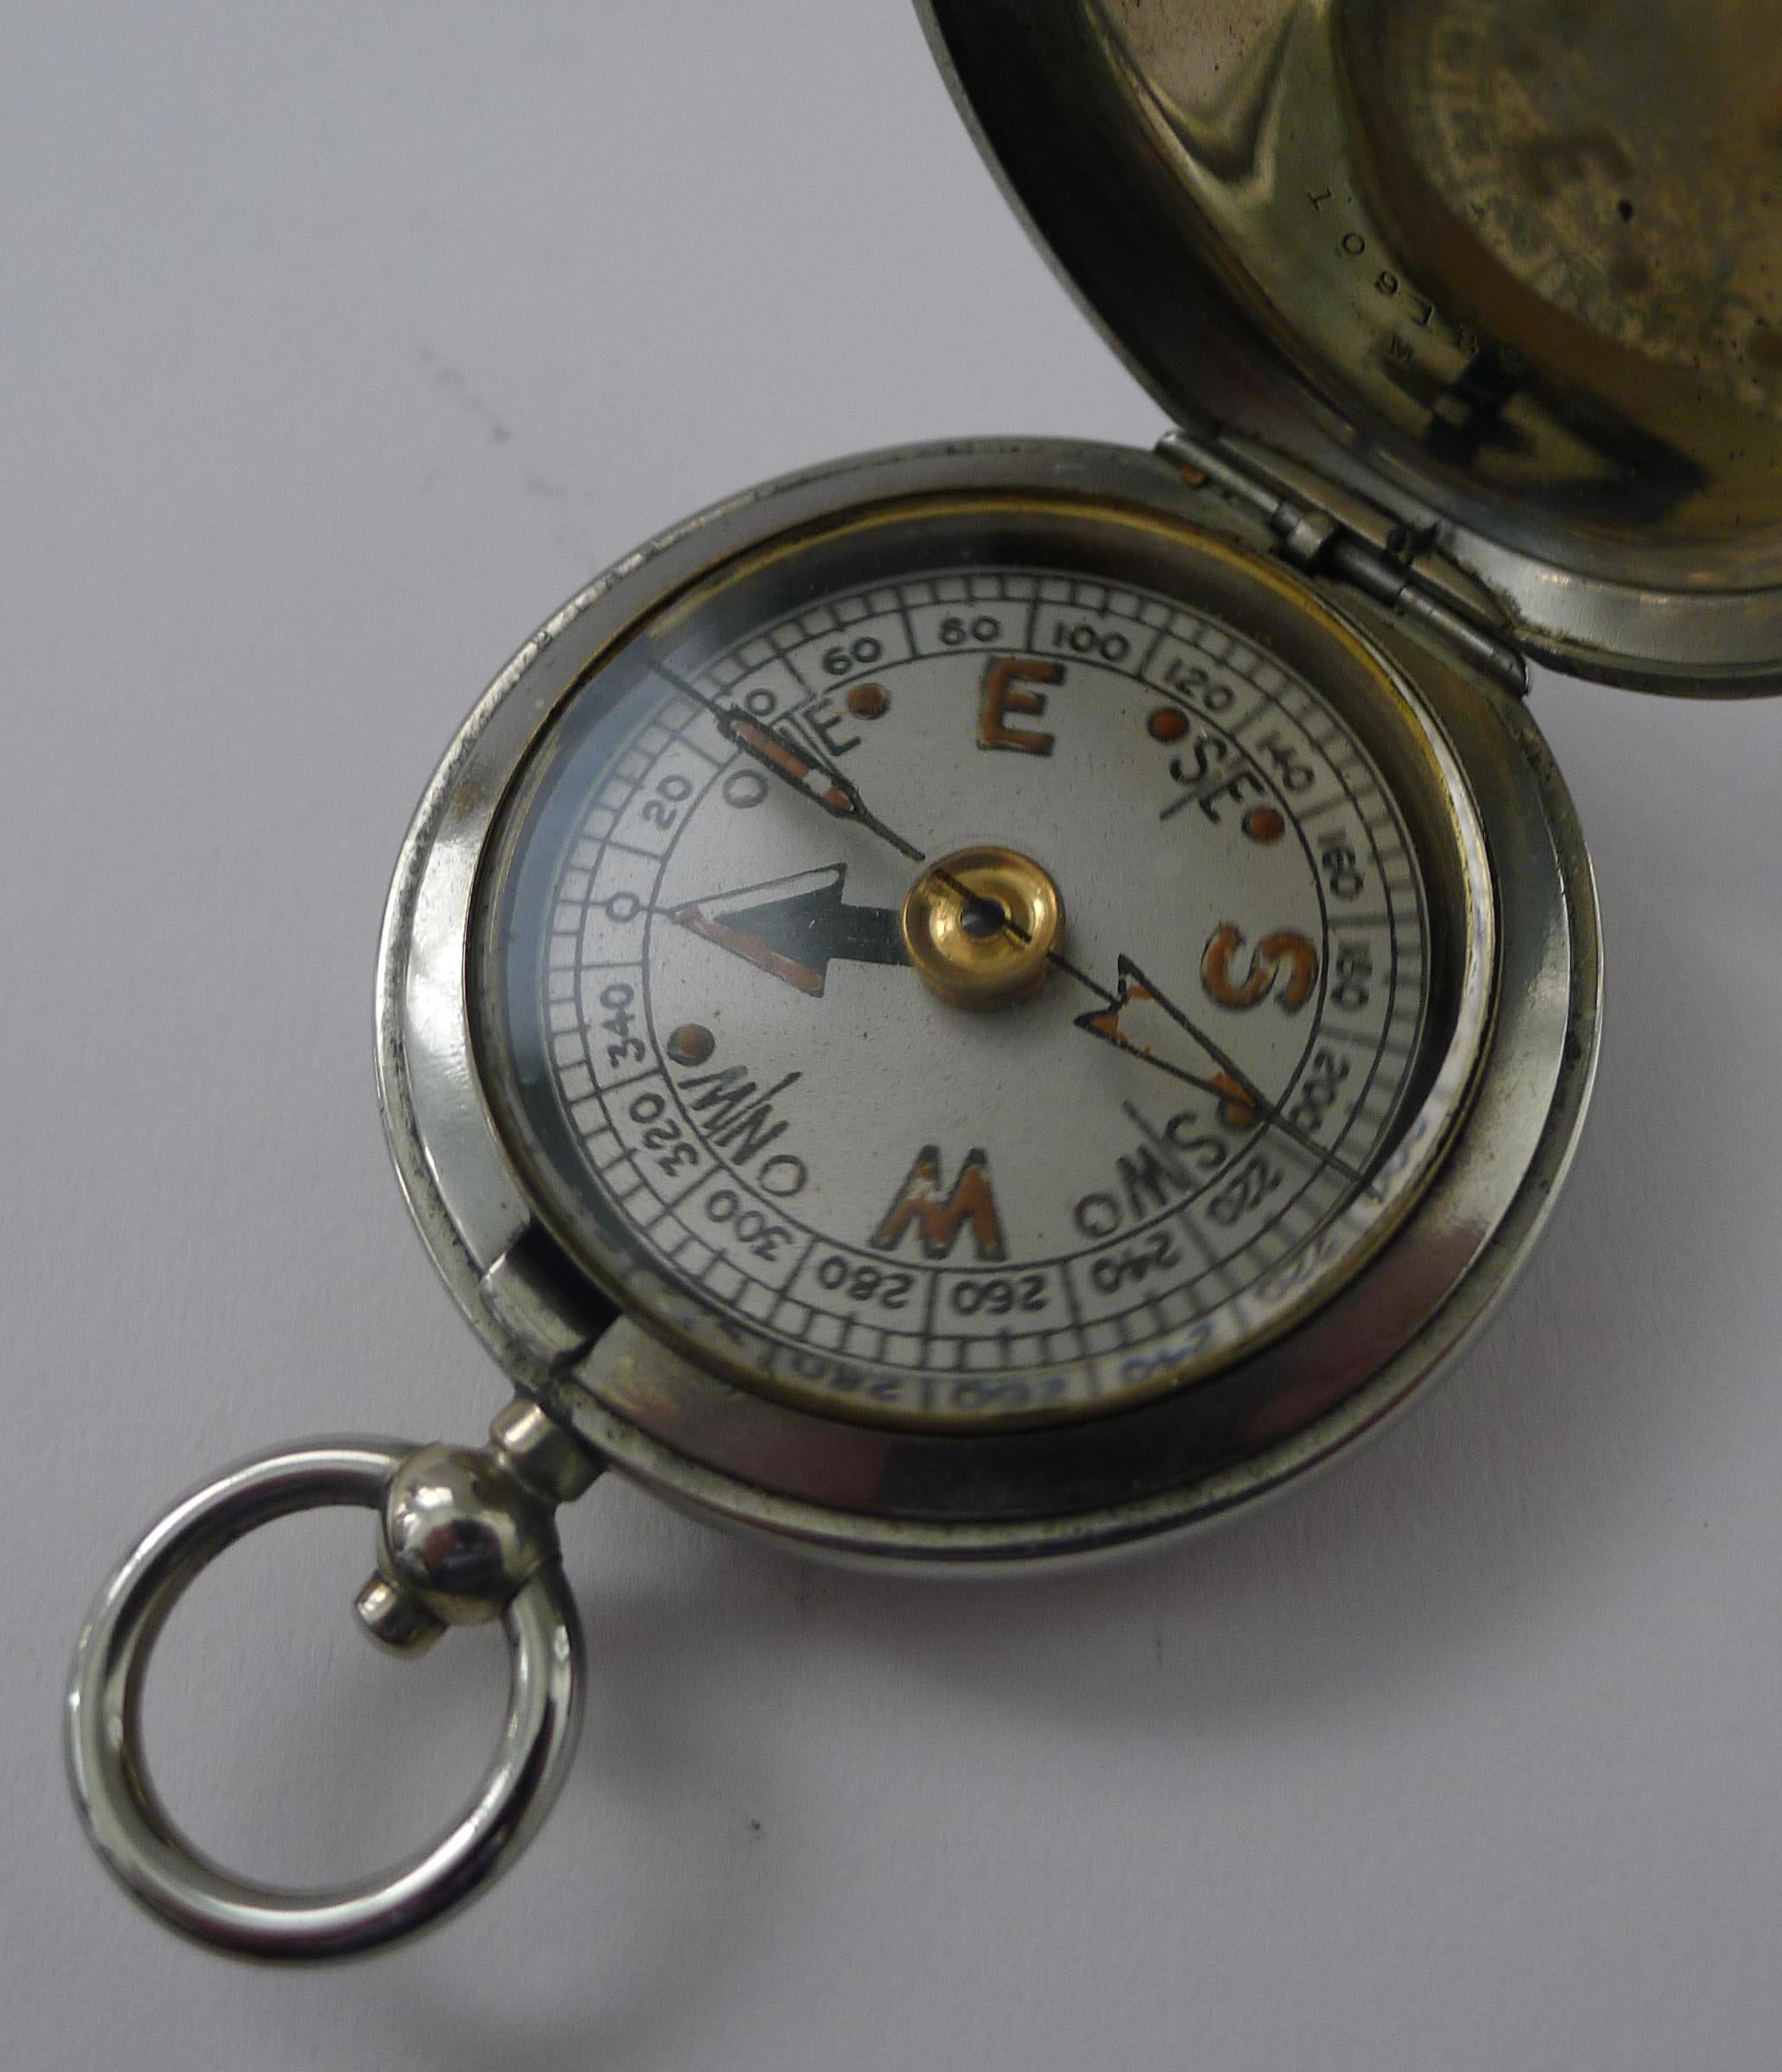 WW1 British Army Officer's Compass - C Haseler & Son c.1918 1